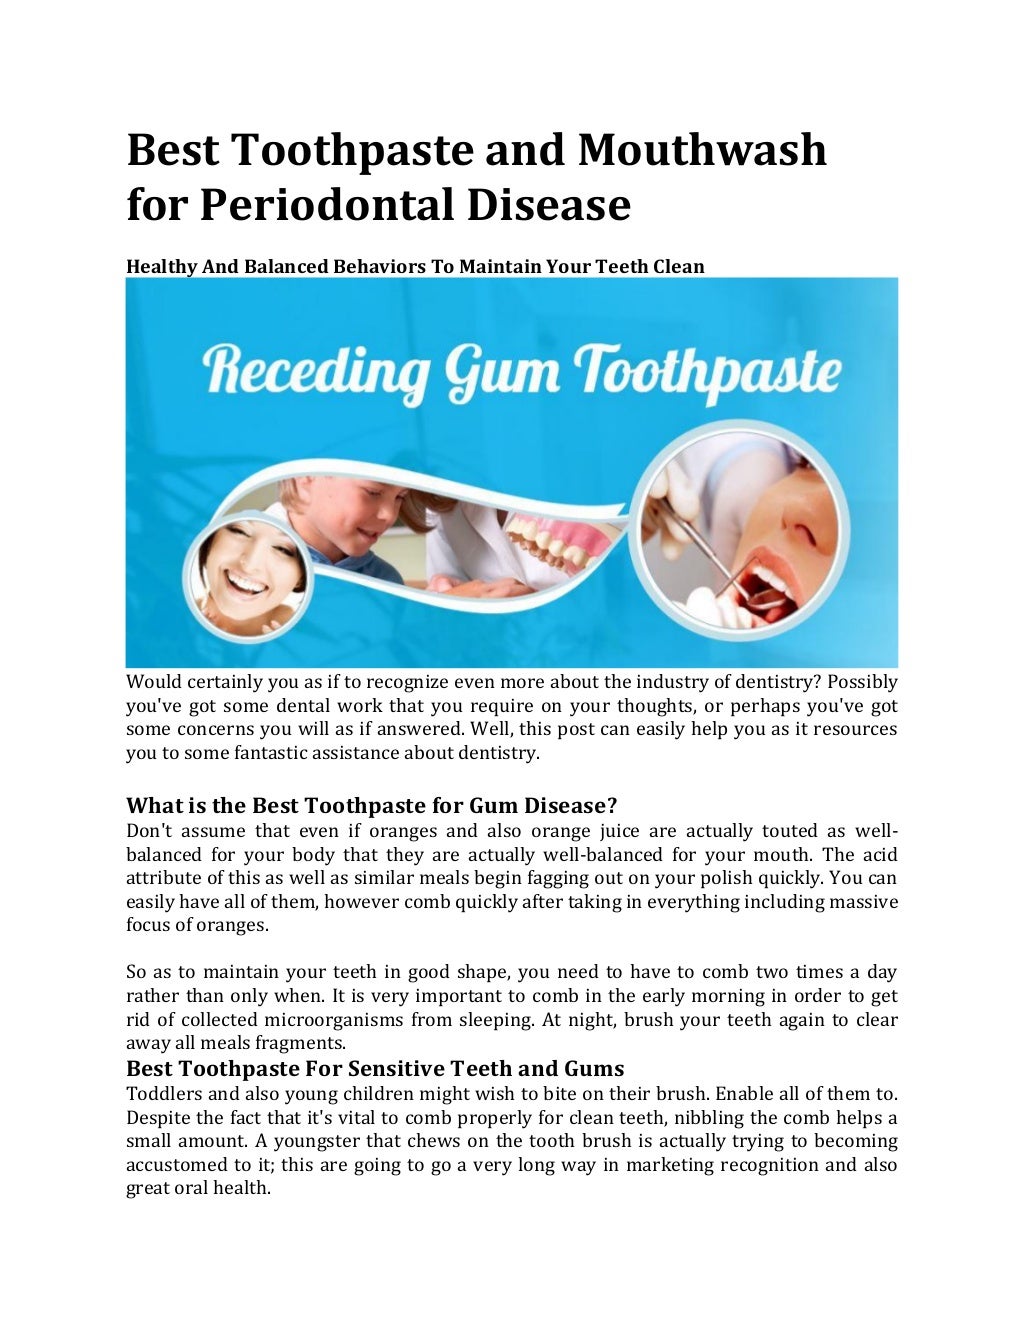 Best Natural Toothpaste for Periodontal disease